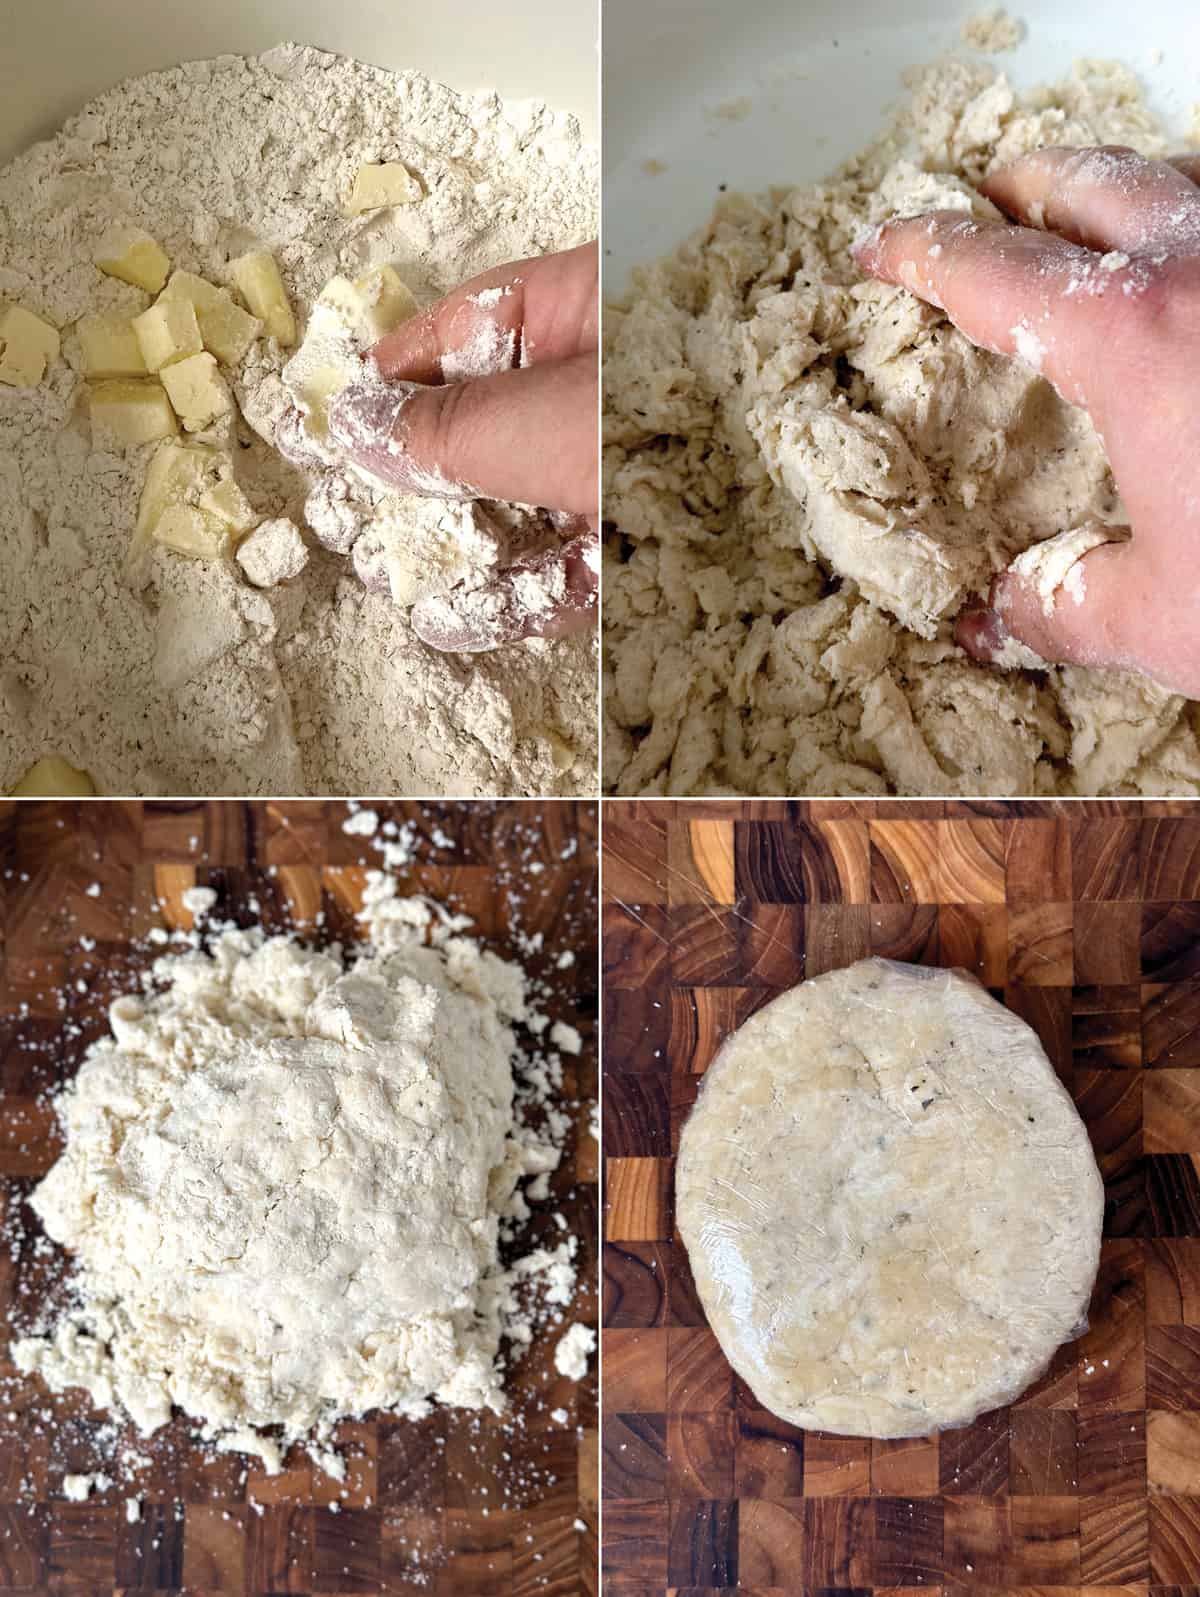 Four images. Top left, a hand with butter and flour between the fingers over a bowl. Top right, a hand mixing flour and butter in a bowl. Bottom left, dough on a cutting board. Bottom right, dough wrapped in cling film on a cutting board.